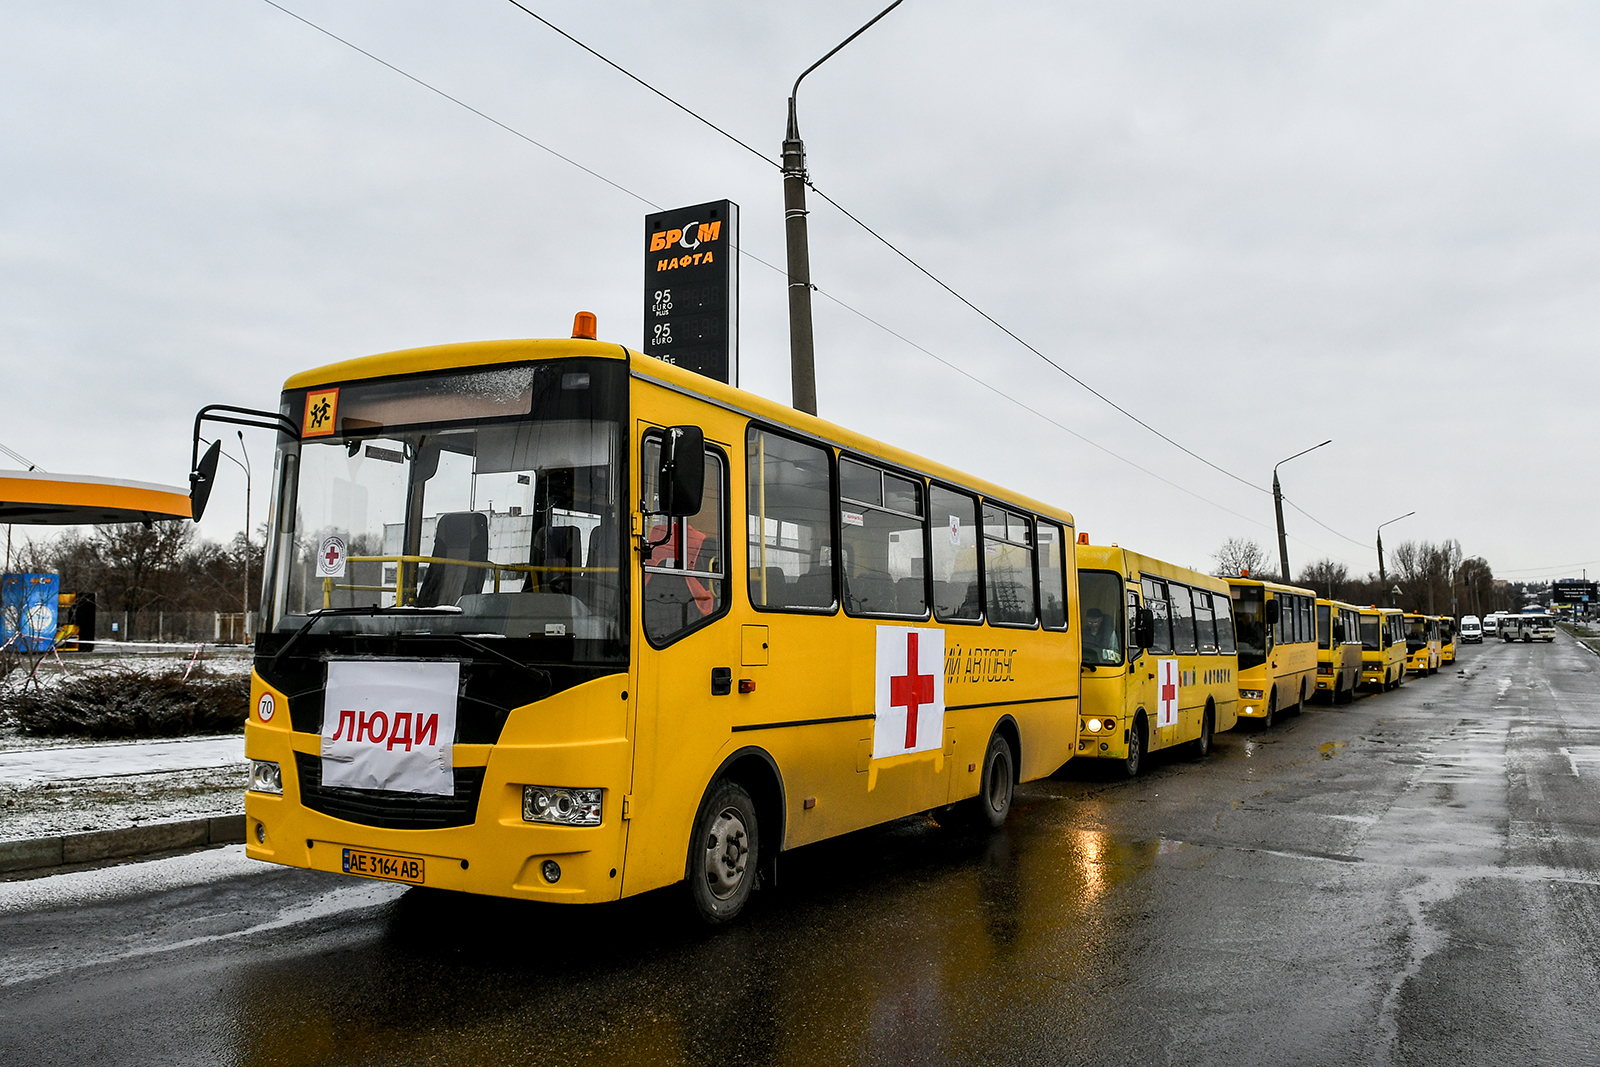 A convoy of buses featuring red crosses waits to journey to Mariupol to deliver humanitarian aid and evacuate people should the green corridor be confirmed, Zaporizhzhia, Ukraine, on March 6.